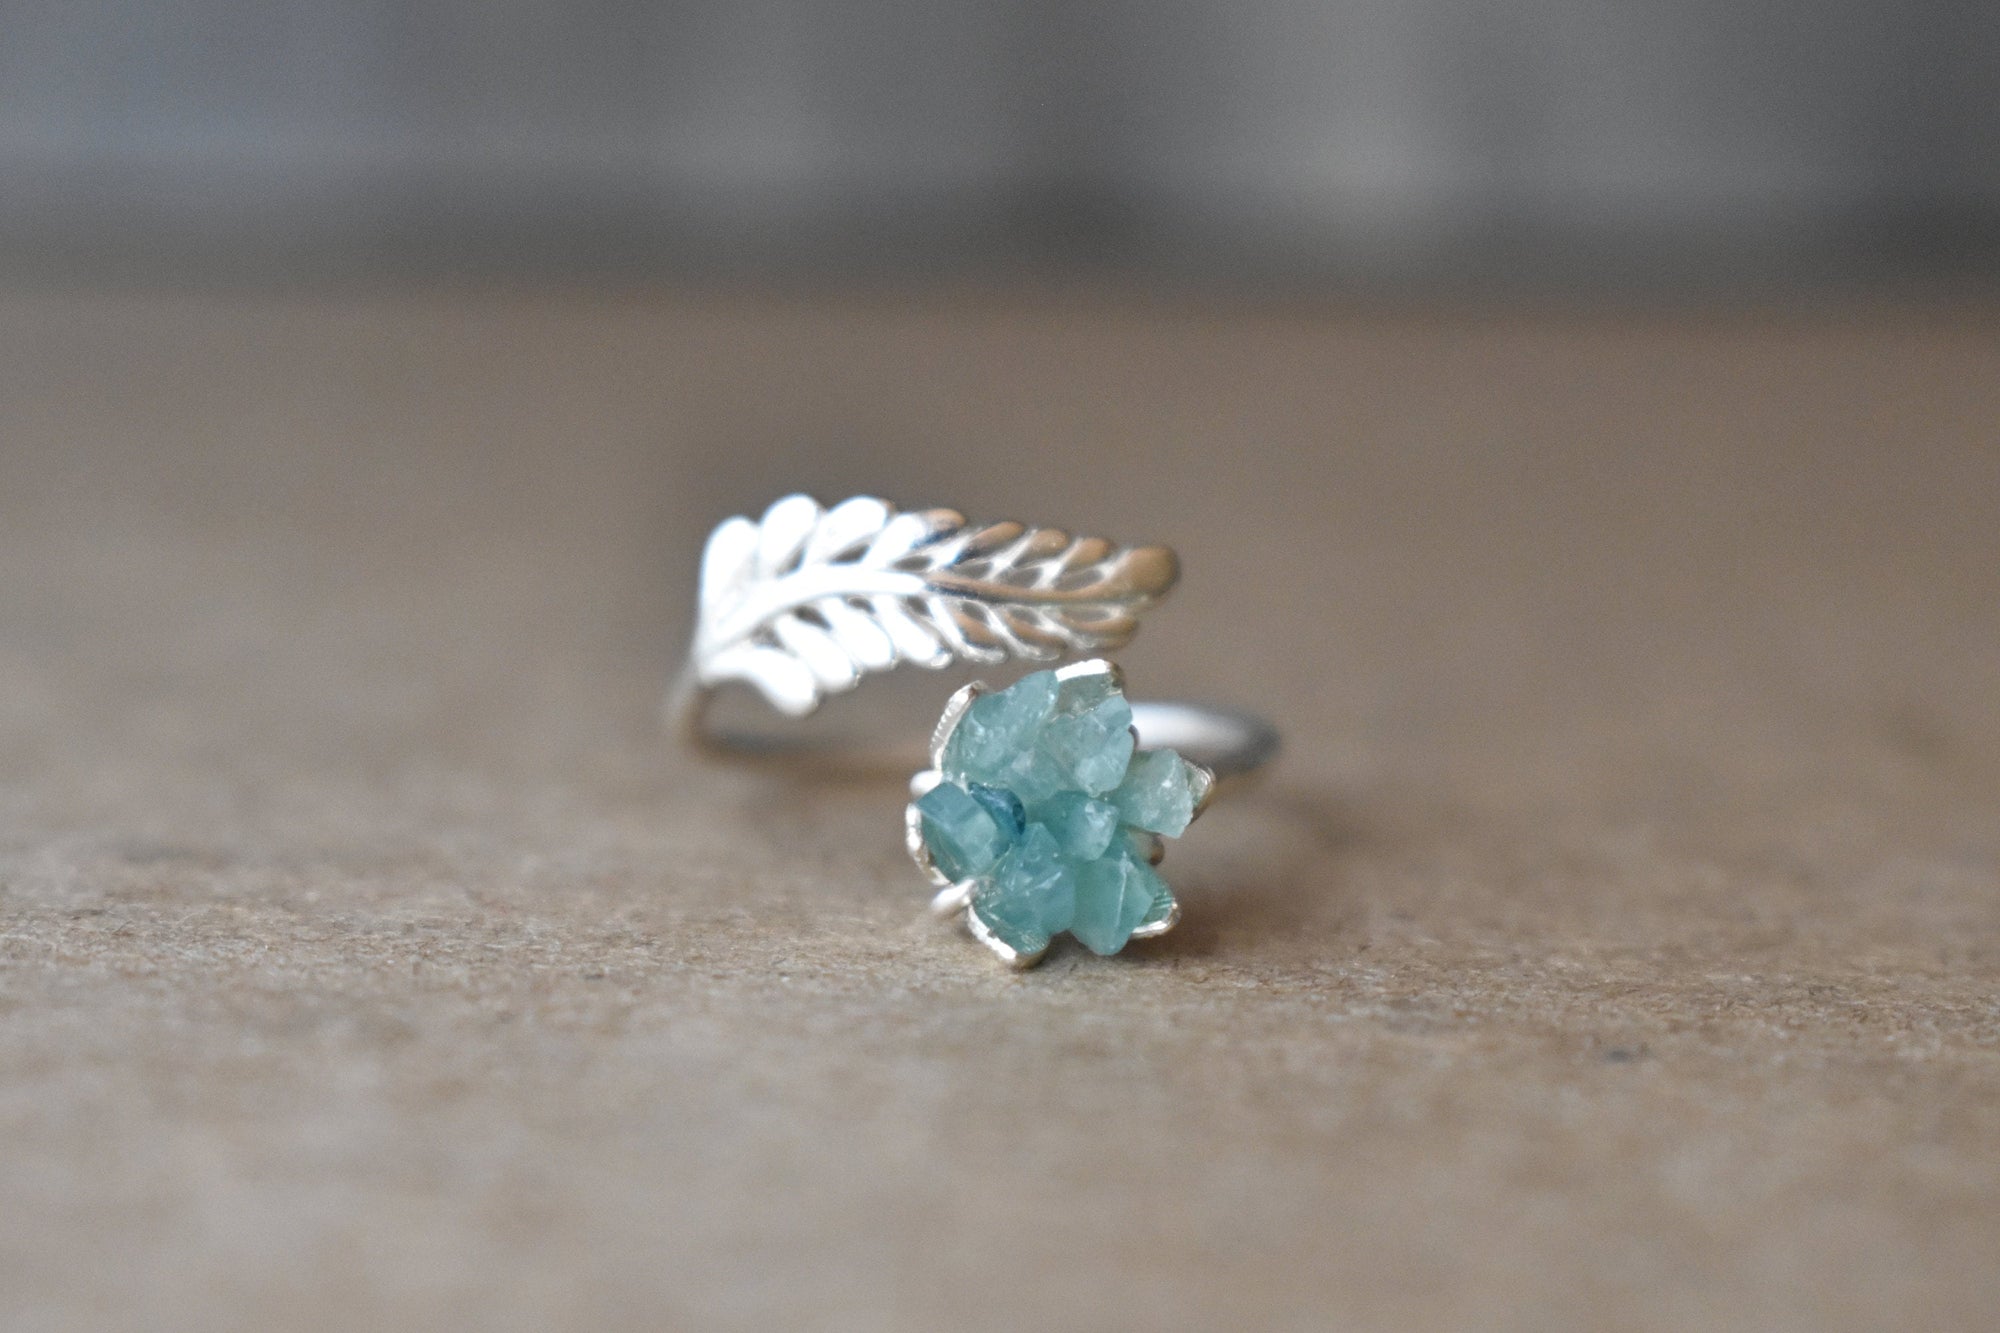 Leaf Cuff Ring in Sterling Silver, Gemologies Authentic Lotus Ring with Granditierite Gemstone, Light Icy Blue Gemstone Flower Ring